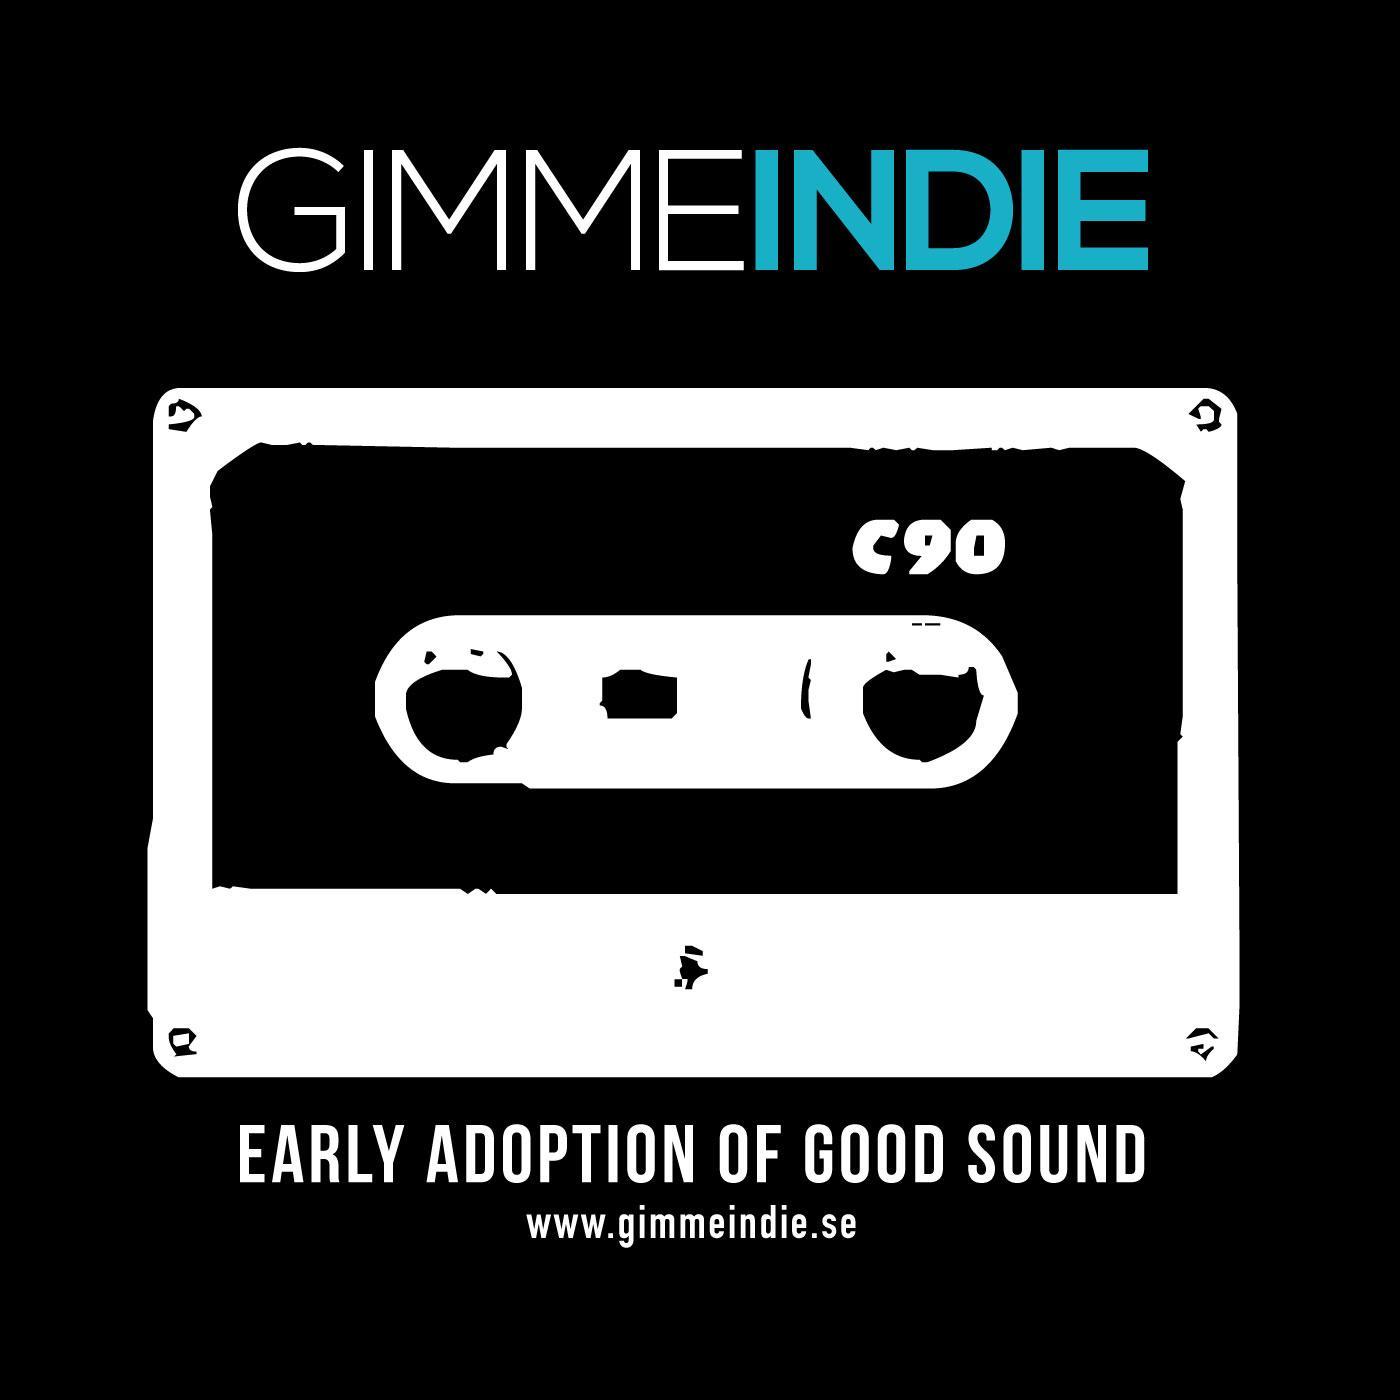 Early adoption of good sound